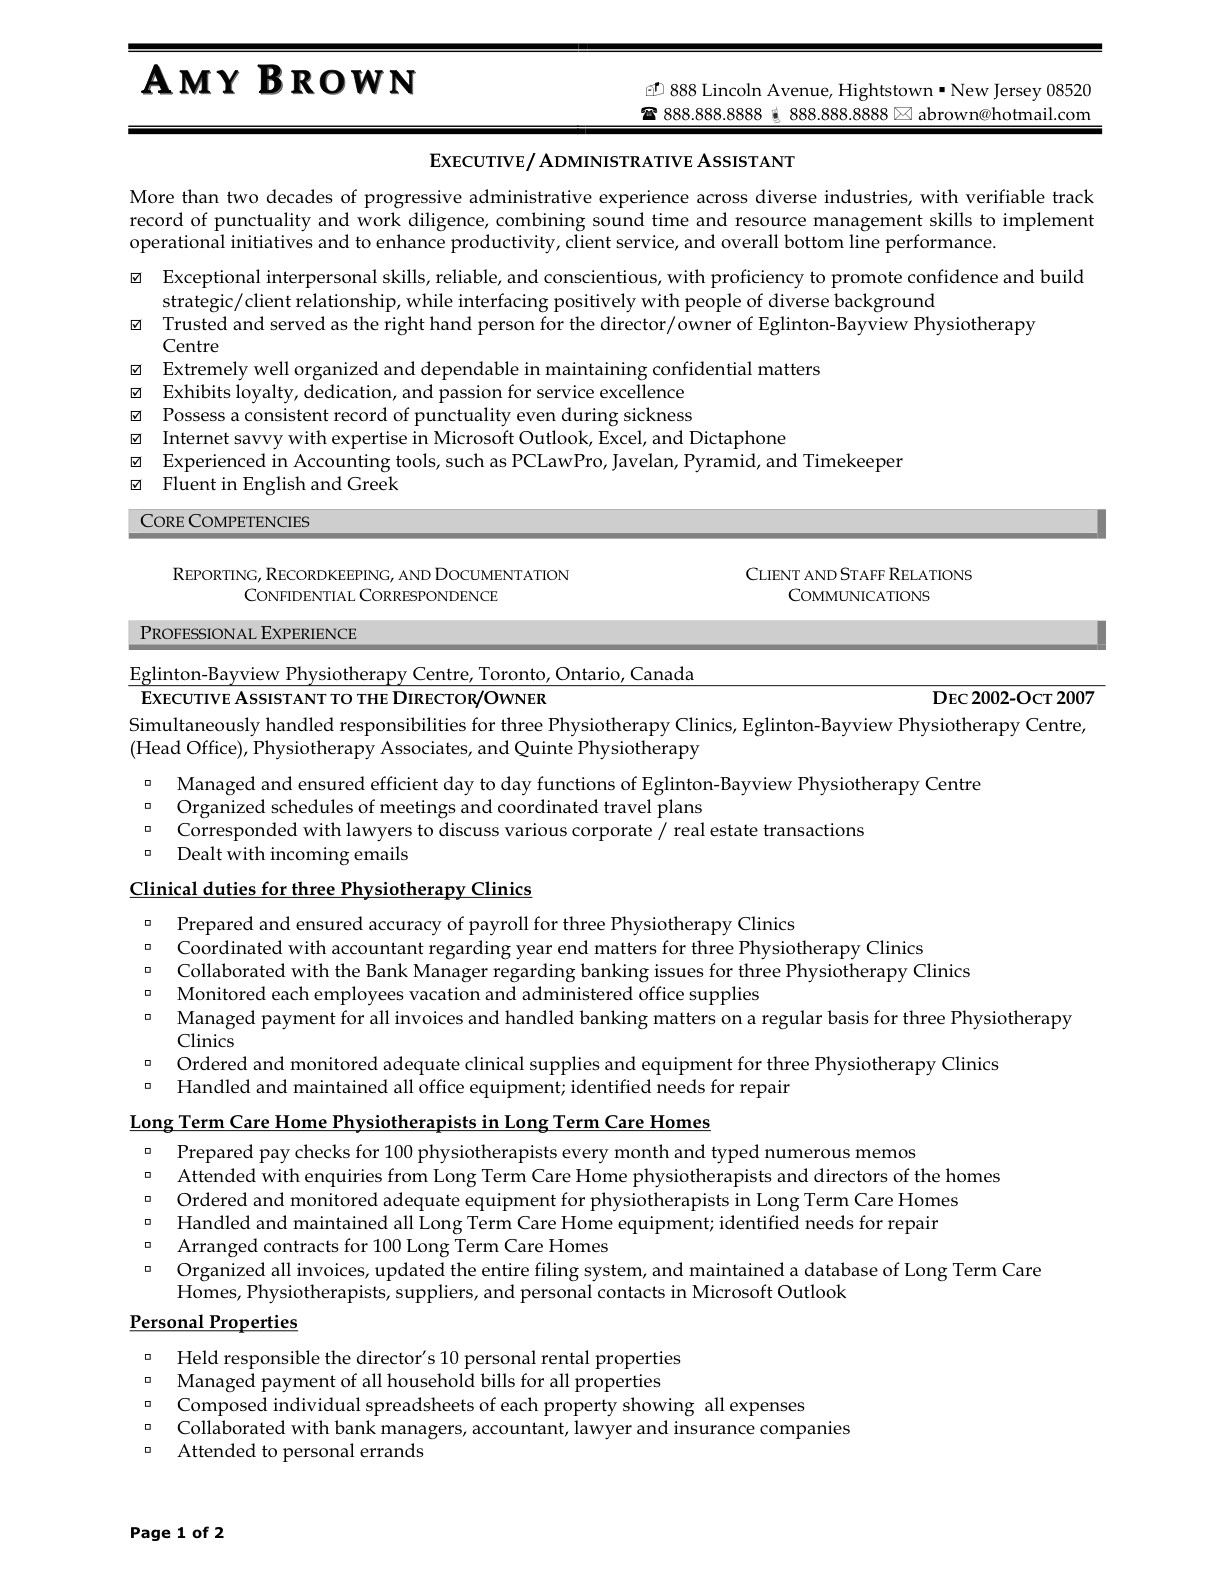 10 executive assistant resume sample